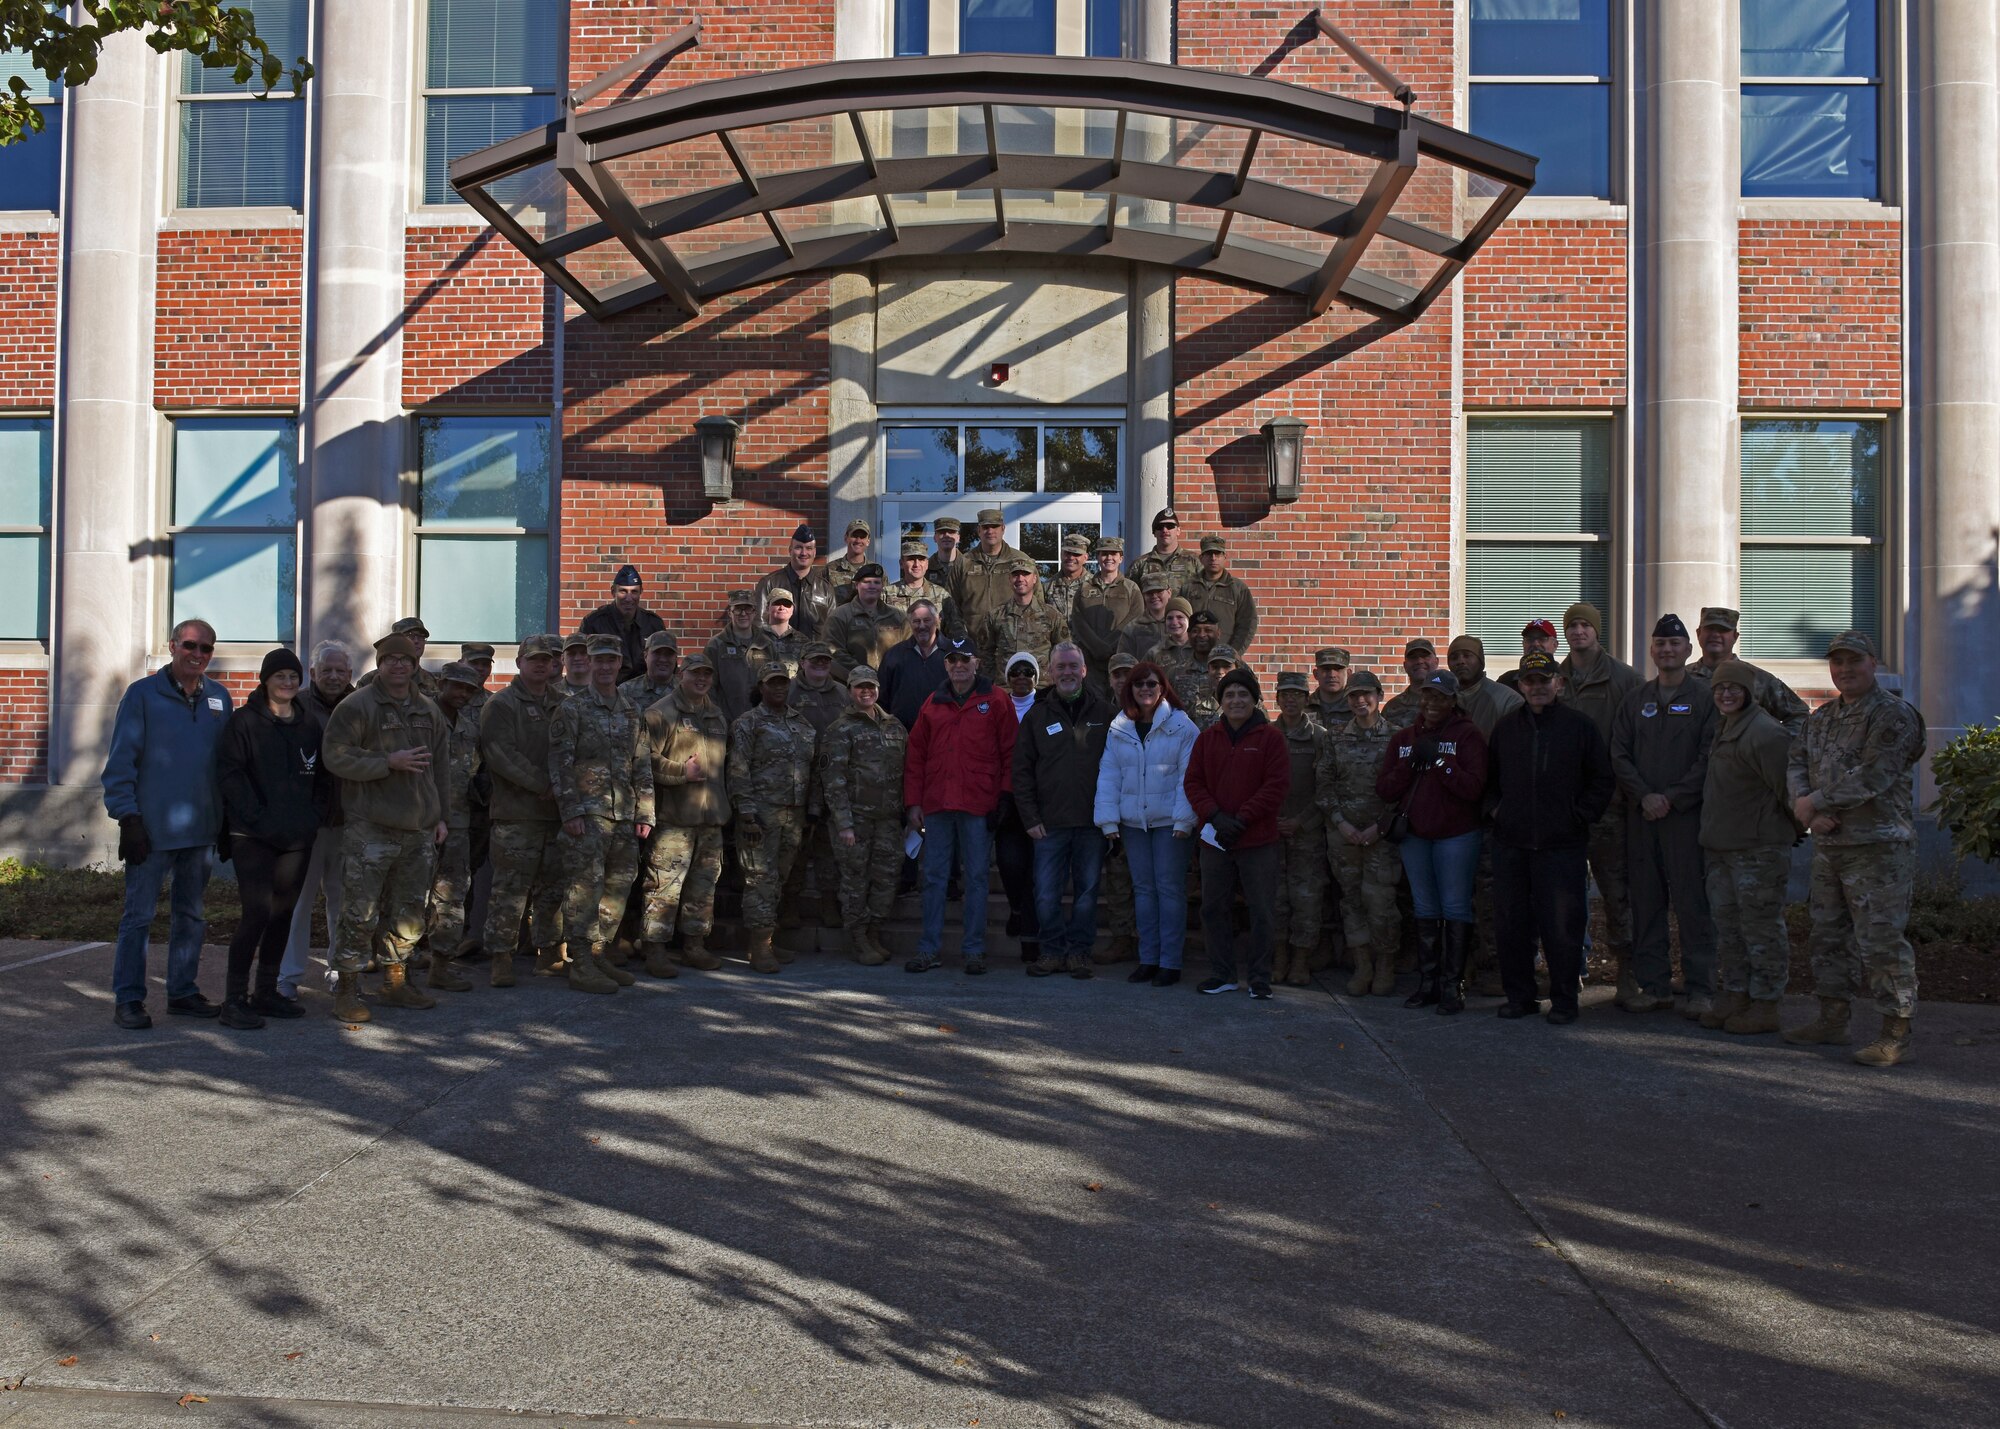 Team McChord Airmen pose for a group photo alongside members of the Air Force Association Washington State Chapter and Pierce Military and Business Alliance after carrying out Operation Turkey Drop at Joint Base Lewis-McChord, Washington, Nov. 18, 2022. Operation Turkey Drop is an event in which the community, local businesses and leadership from around JBLM give out turkeys to Team McChord Airmen and their families in celebration of Thanksgiving. (U.S. Air Force photo by Staff Sgt. Zoe Thacker)